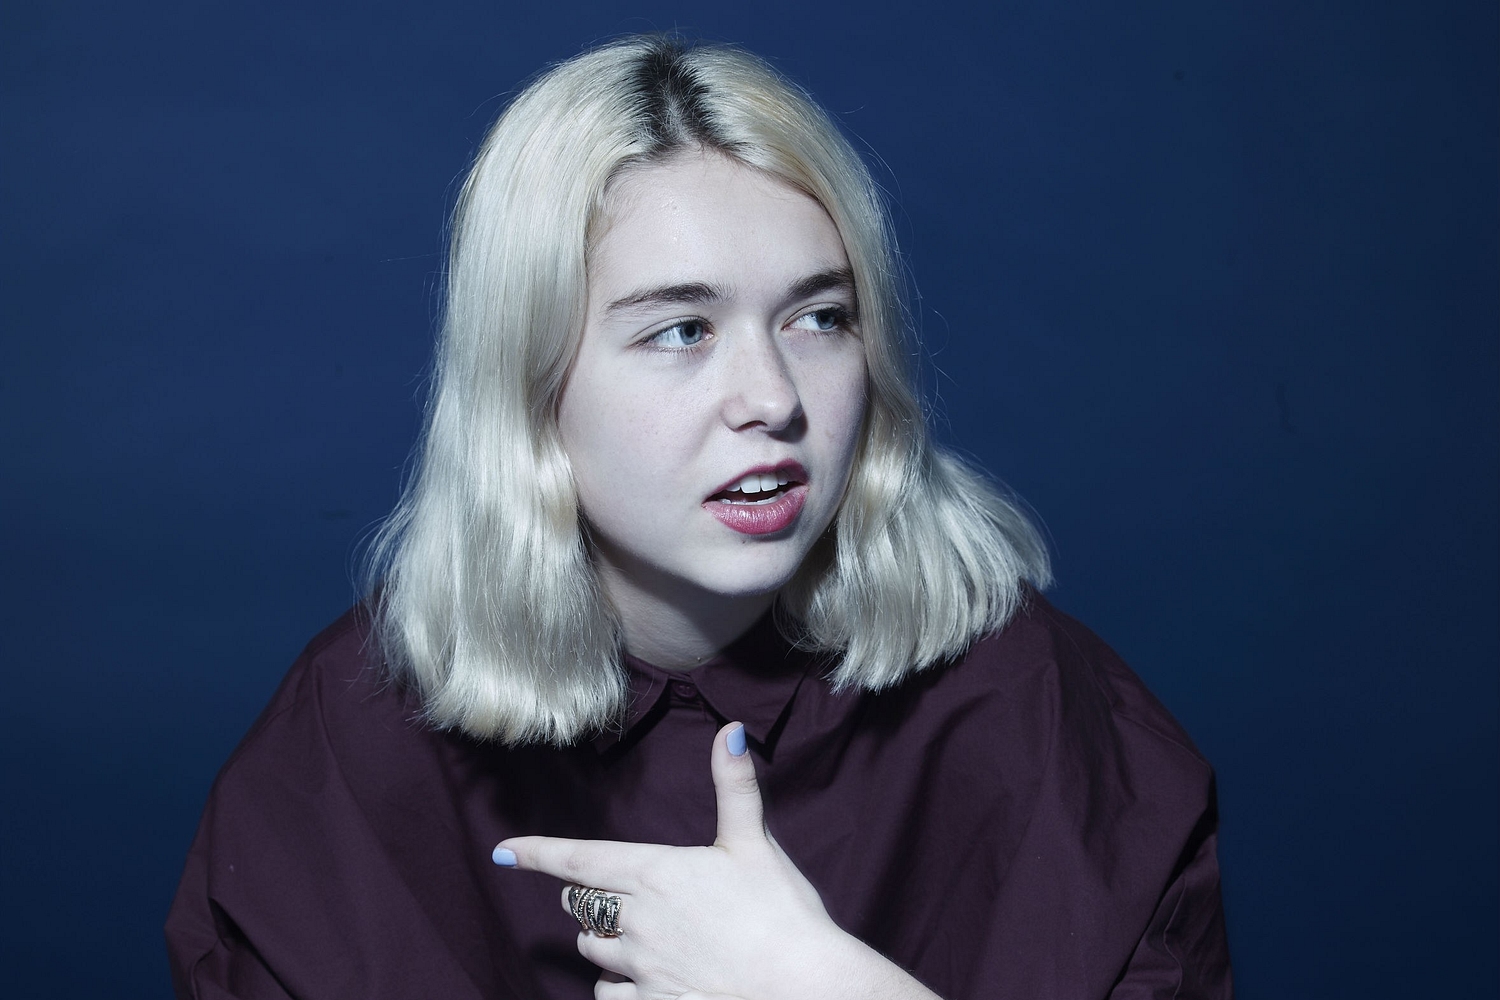 Snail Mail shares new song, ‘Let’s Find An Out’